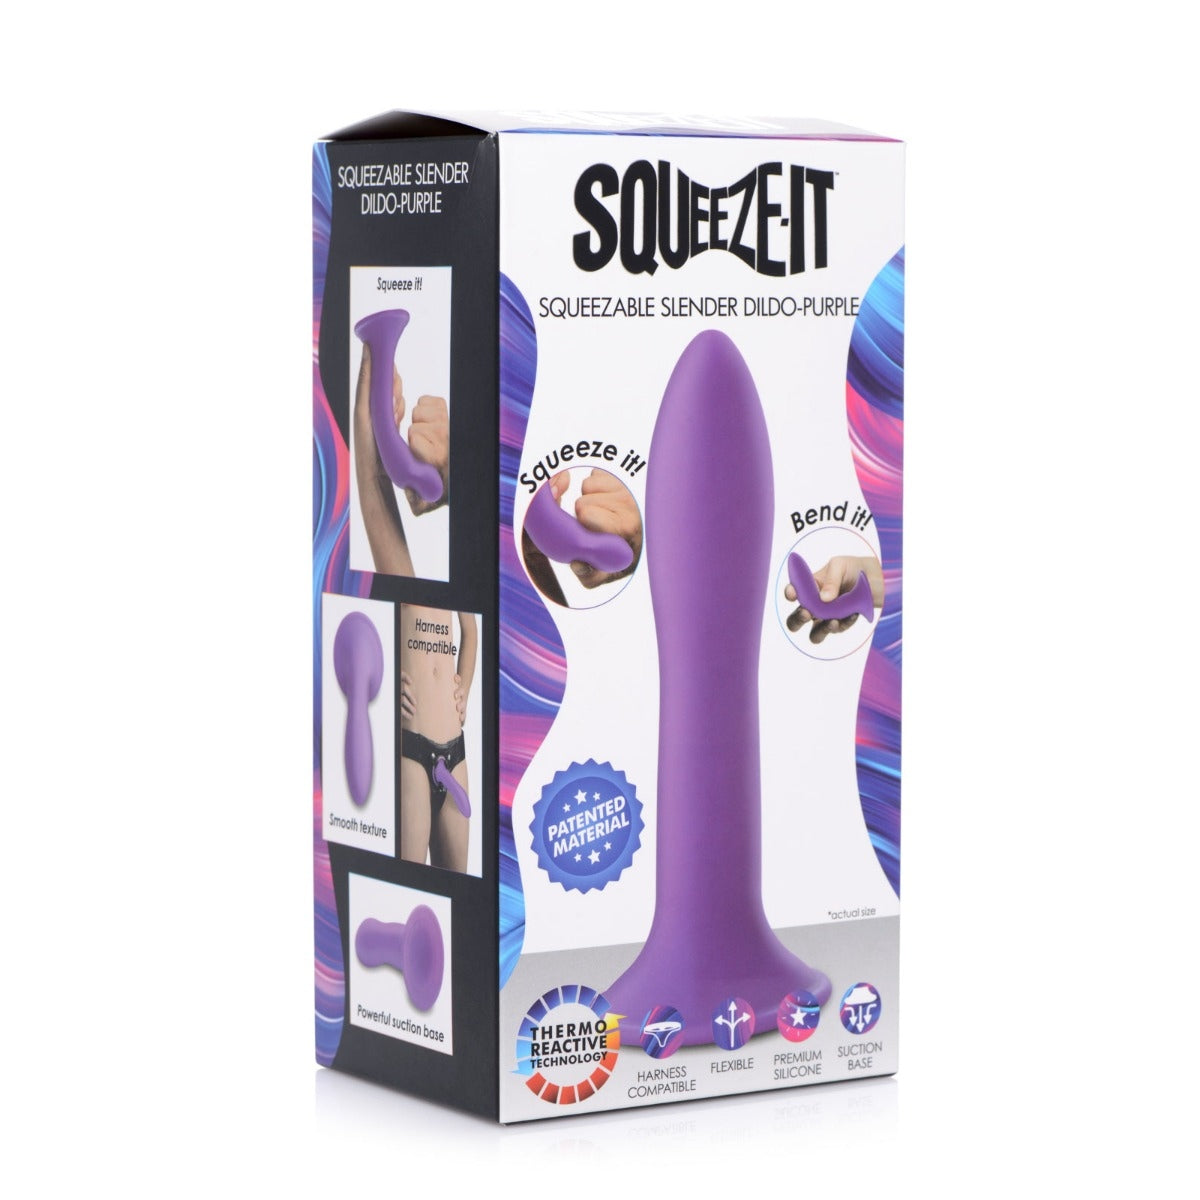 Squeeze-It Squeezable Slender Dildo Purple 5 Inch